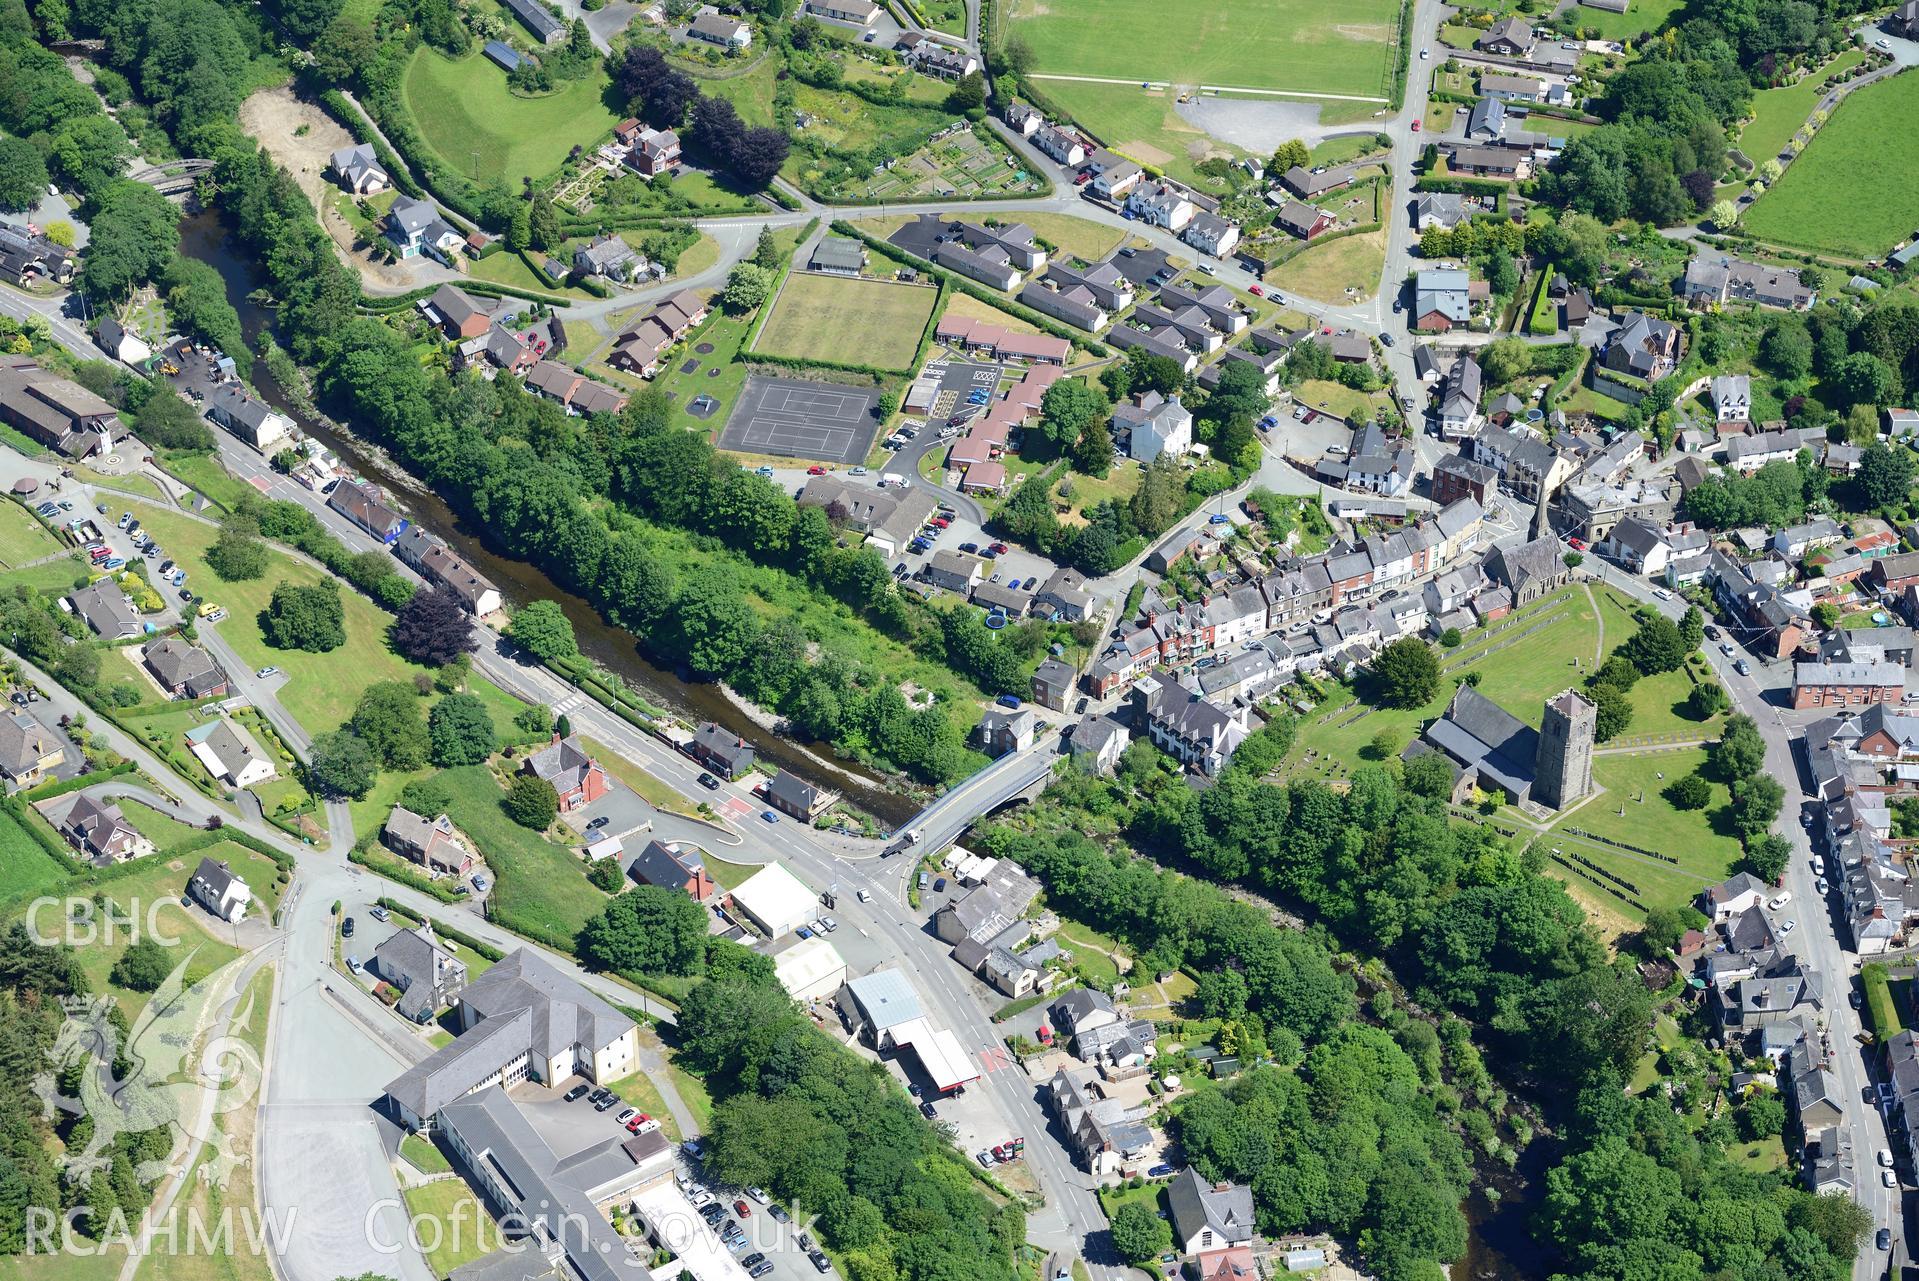 St. Mary's church and Llanfair bridge in the town of Llanfair Caereinion, west of Welshpool. Oblique aerial photograph taken during the Royal Commission's programme of archaeological aerial reconnaissance by Toby Driver on 30th June 2015.